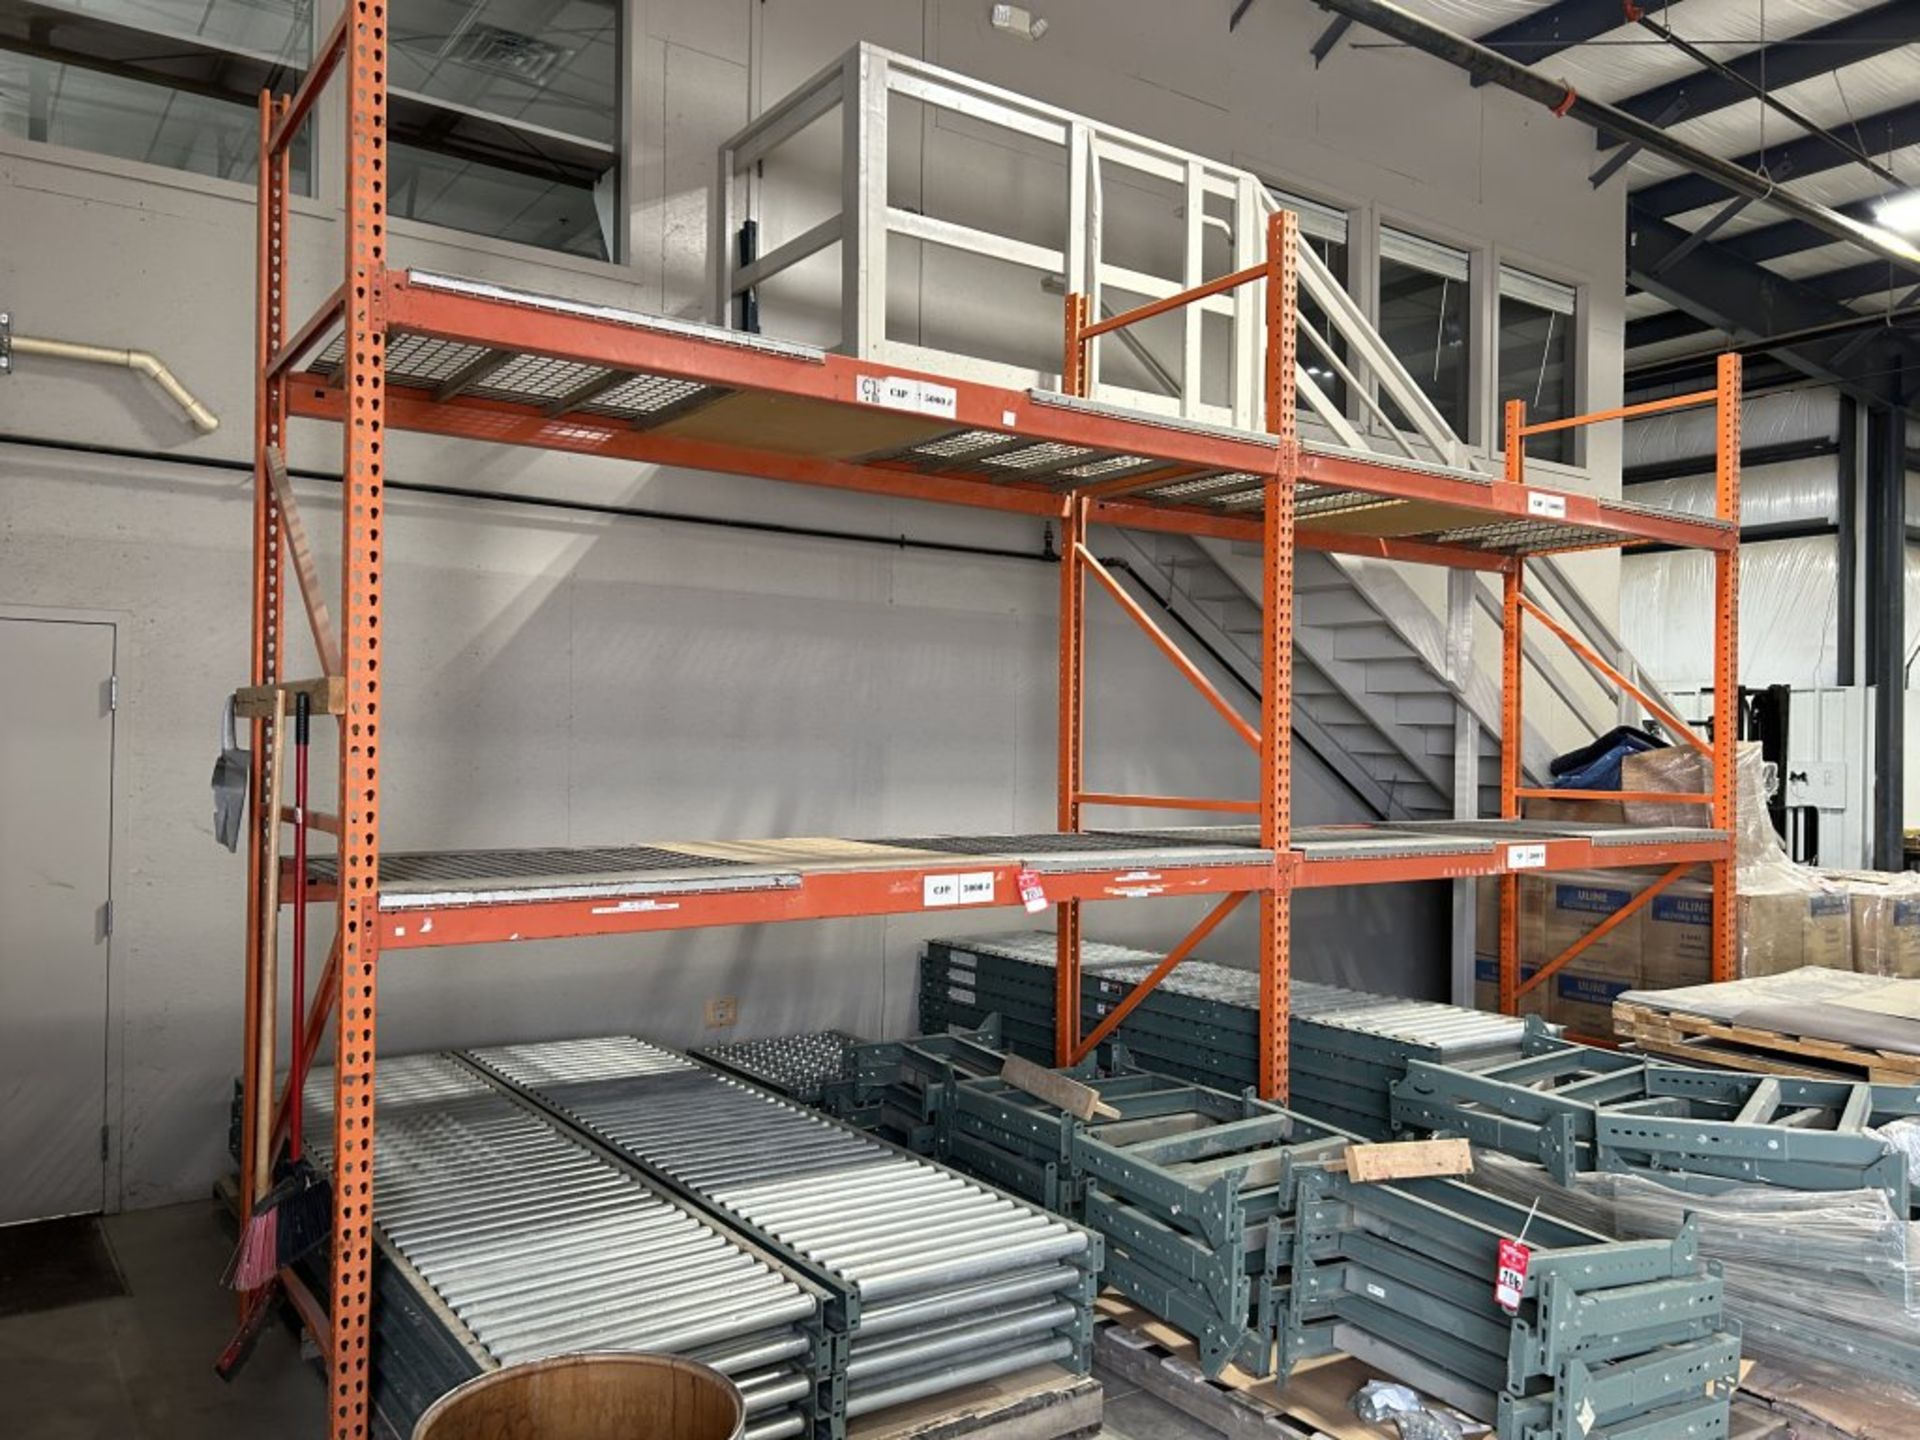 PALLET RACKING SECTION, (3) 12'T X 4'D UPRIGHTS, (8) 10' WIDE CROSSBEAMS, (8) METAL MESH SECTIONS